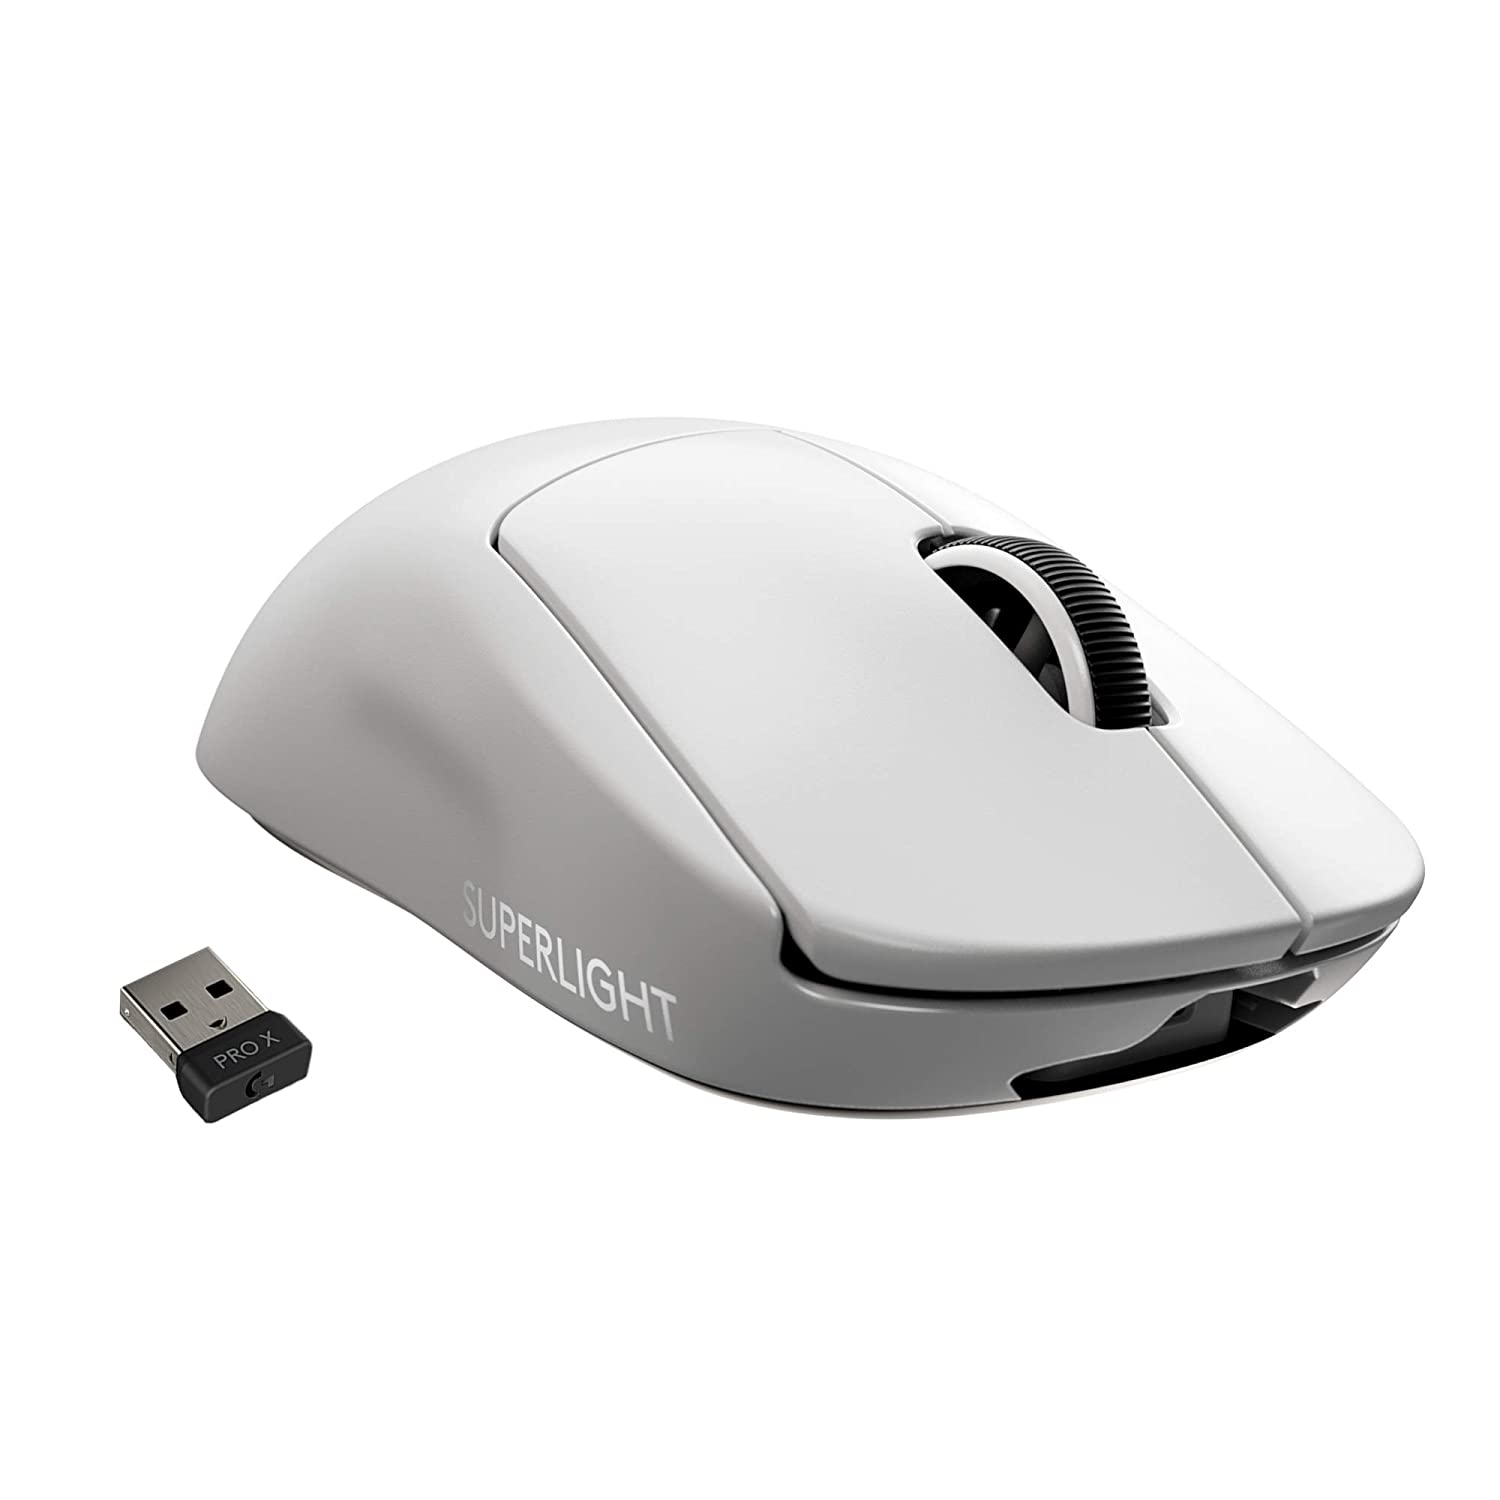 Logitech G pro X Superlight White at best price in India on tlggaming.com